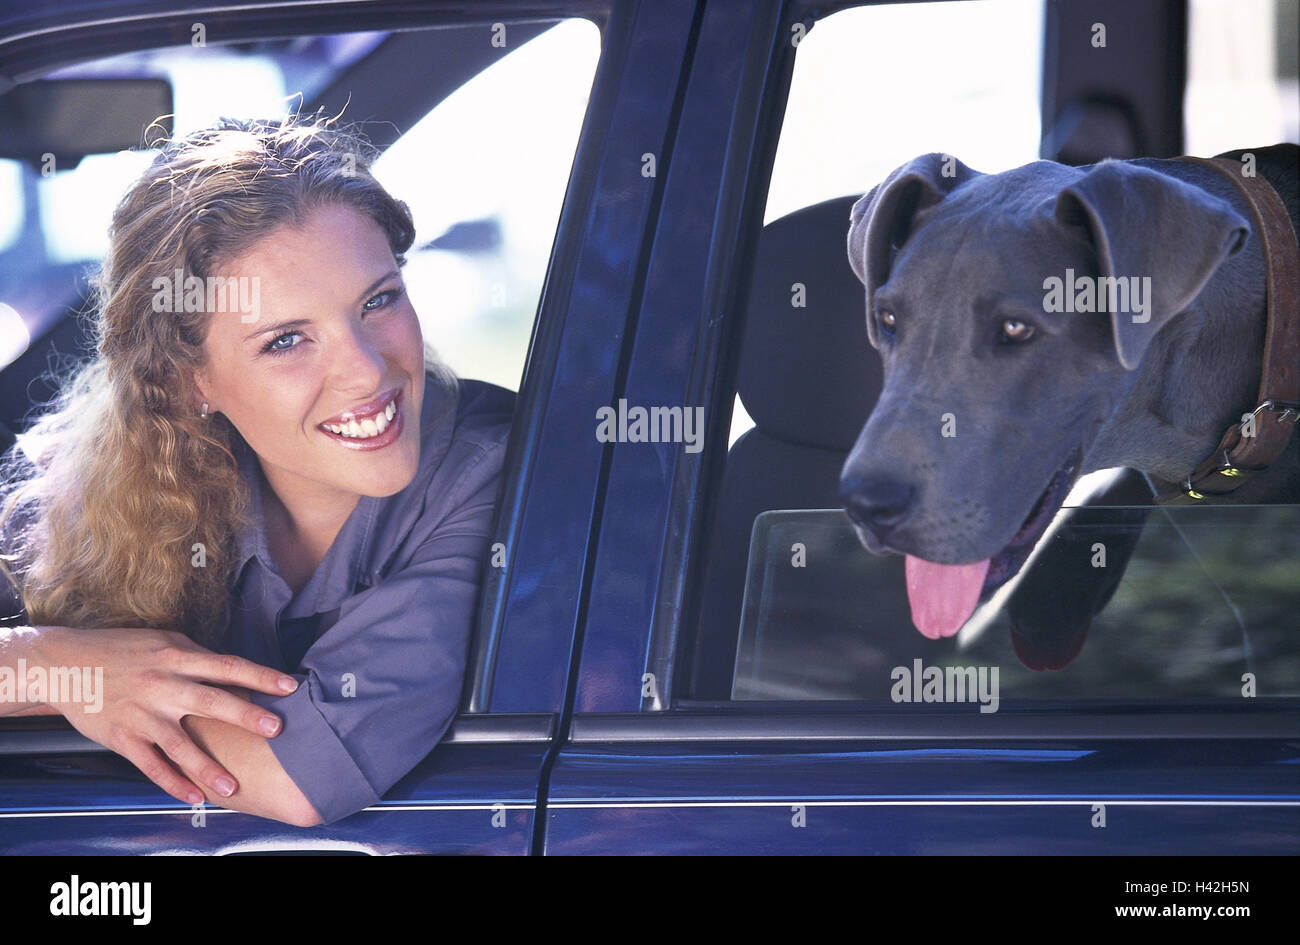 Car, window, driver, smile, dog, portrait, 21 years, driver, woman, blond, long-haired, curls, beauty, attraction, made up, animal-loving, animal-loving, pet, animal, mammal, dogs, excursion, vehicle, passenger car Stock Photo